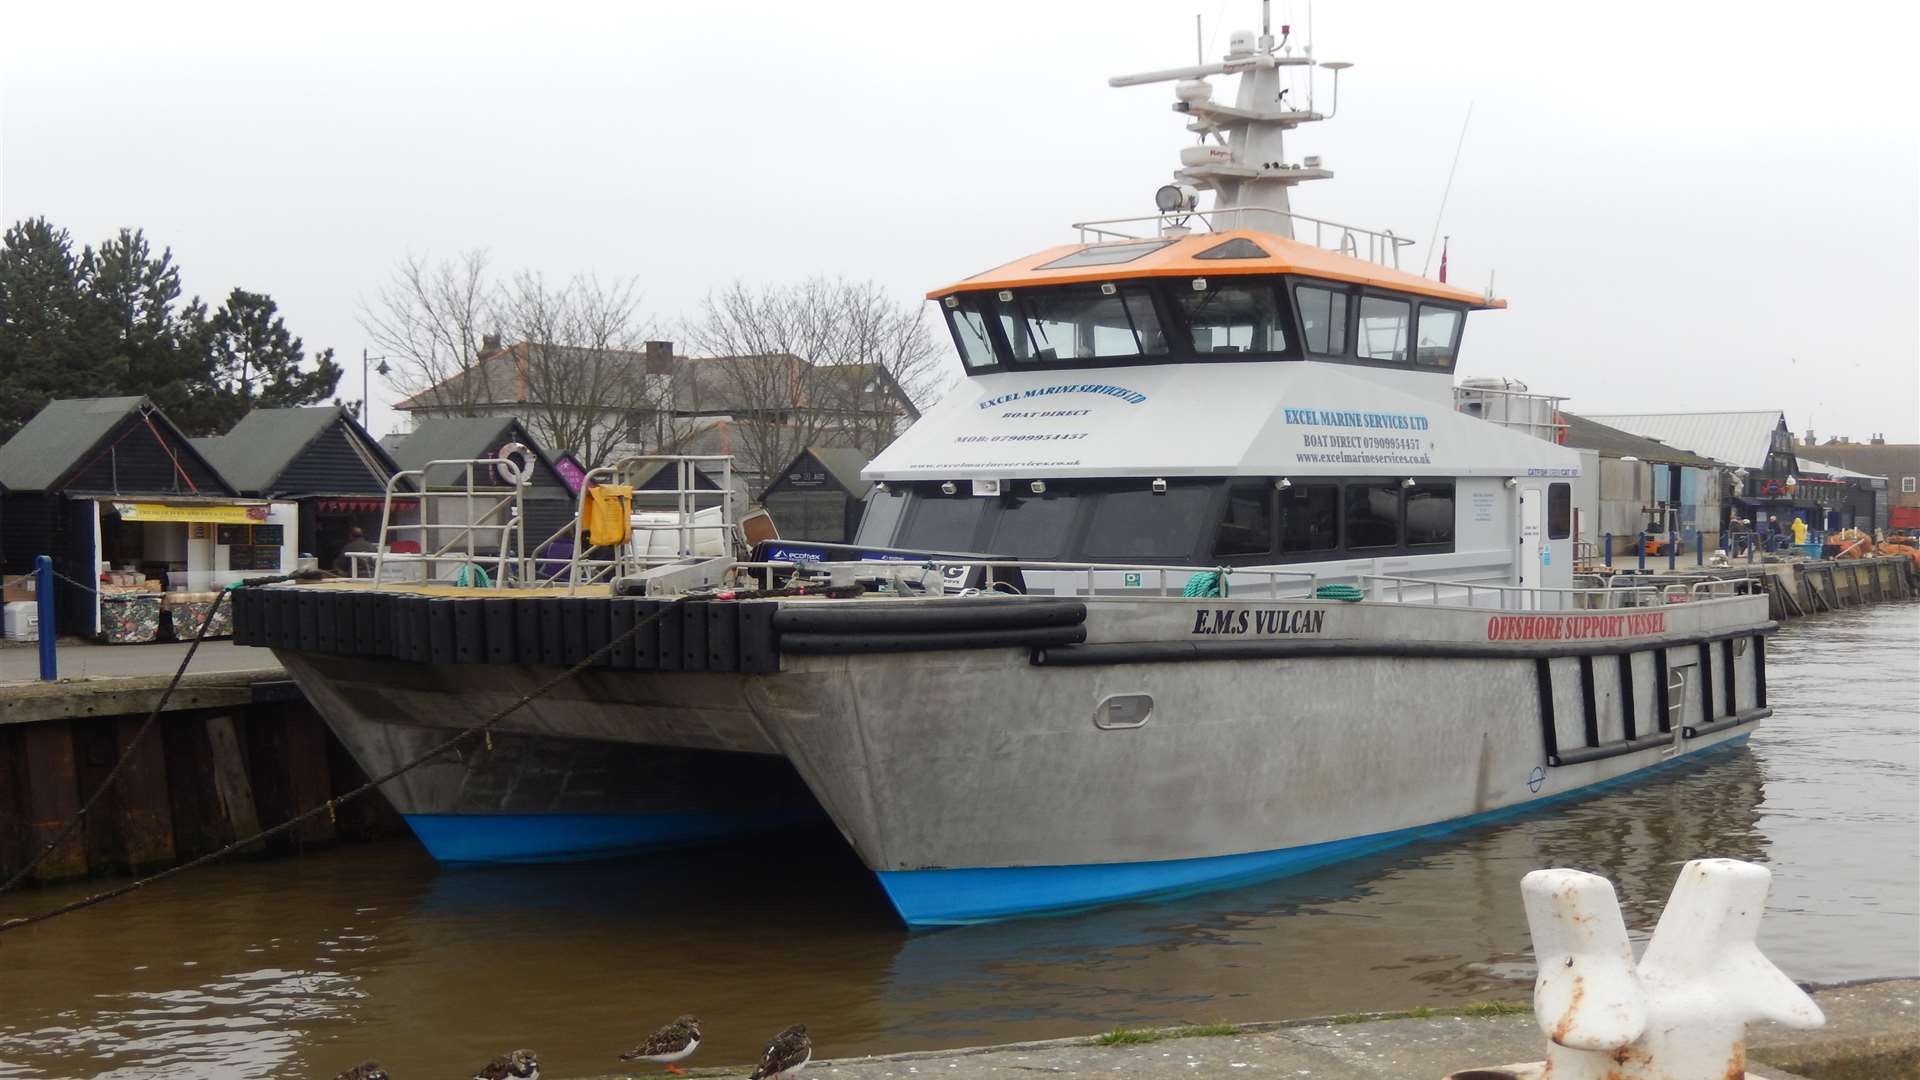 The Vulcan boat used to maintain the wind farm was berthed in Whitstable Harbour this year